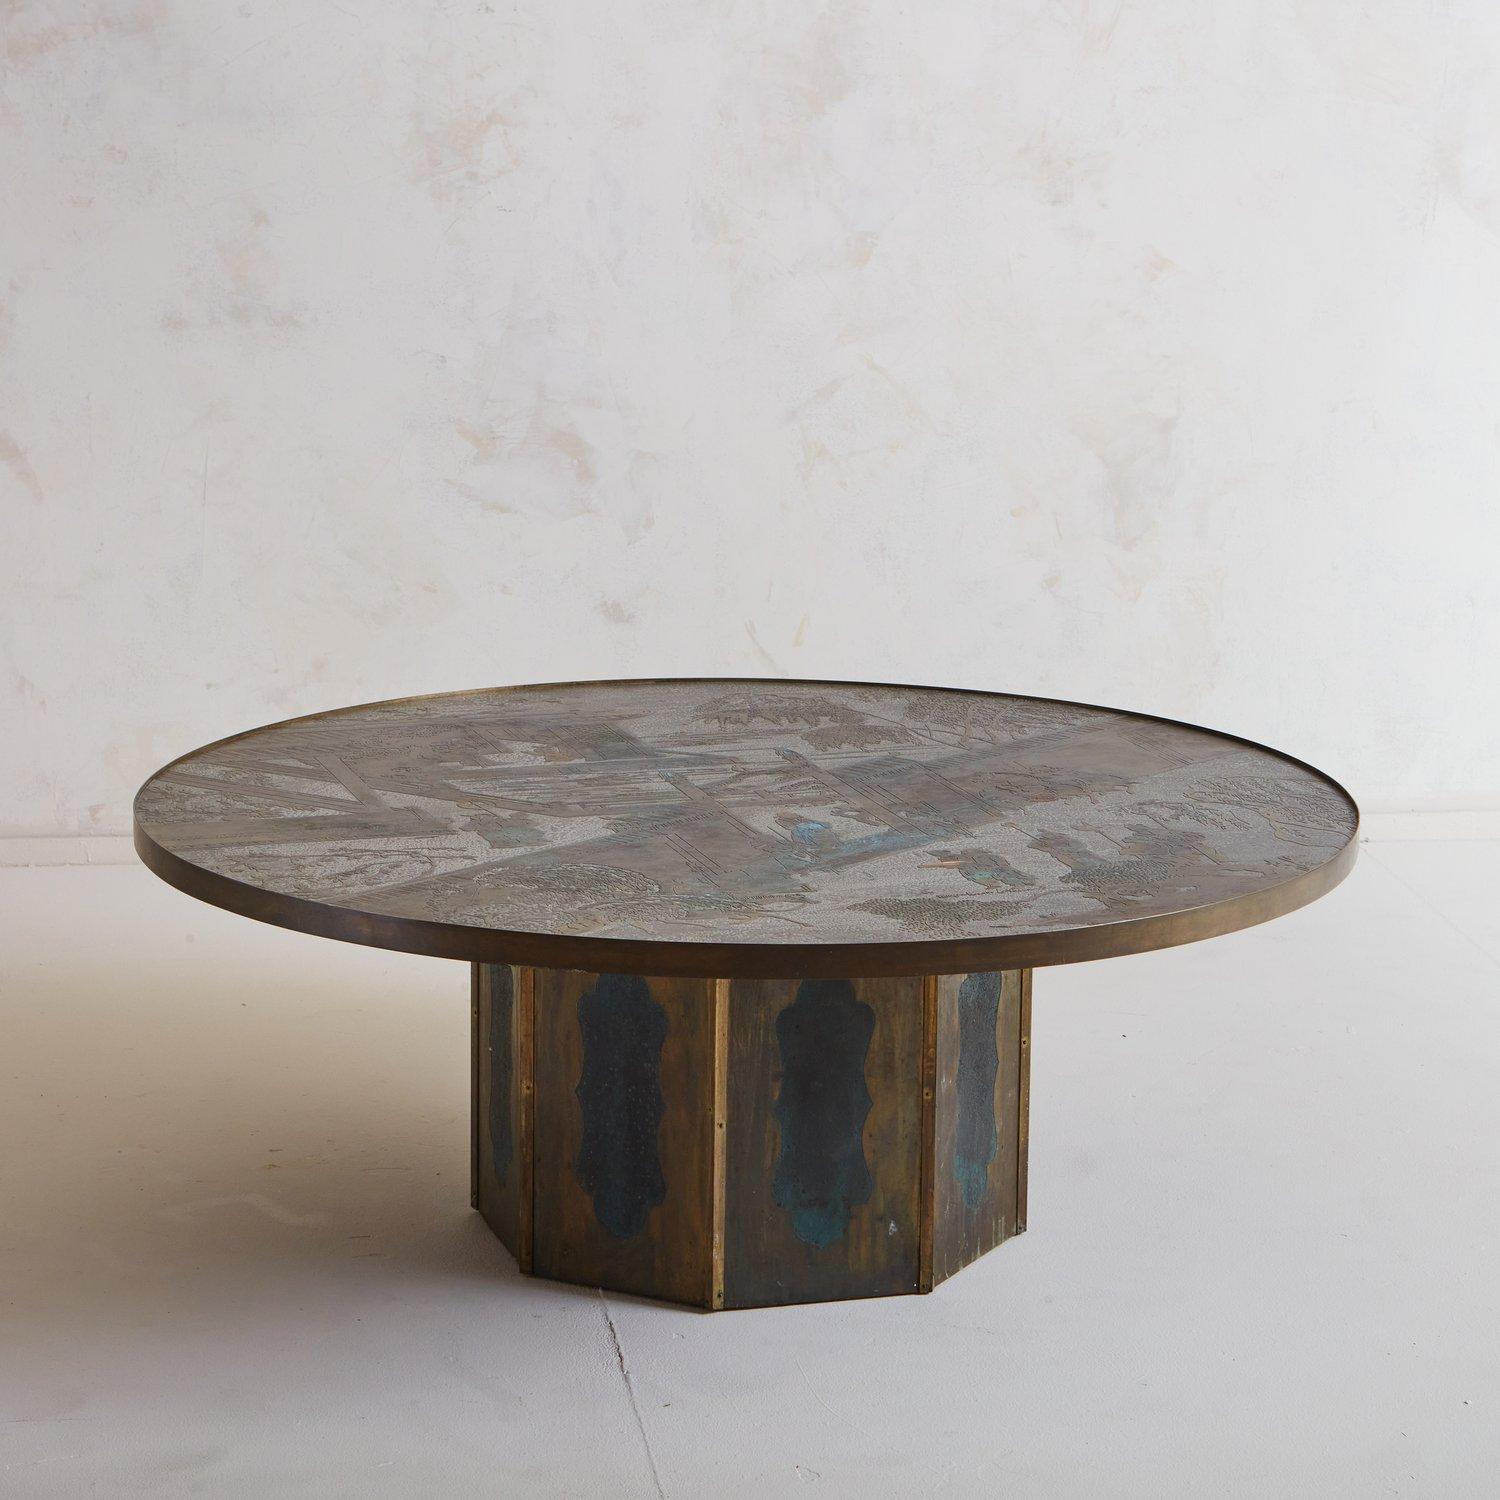 A ‘Chan’ coffee table designed by Philip and Kelvin Laverne in the 1960s. This table was constructed with polychromed pewter and bronze with a stunning patina. It features a circular tabletop with intricate etchings displaying a Chinese landscape